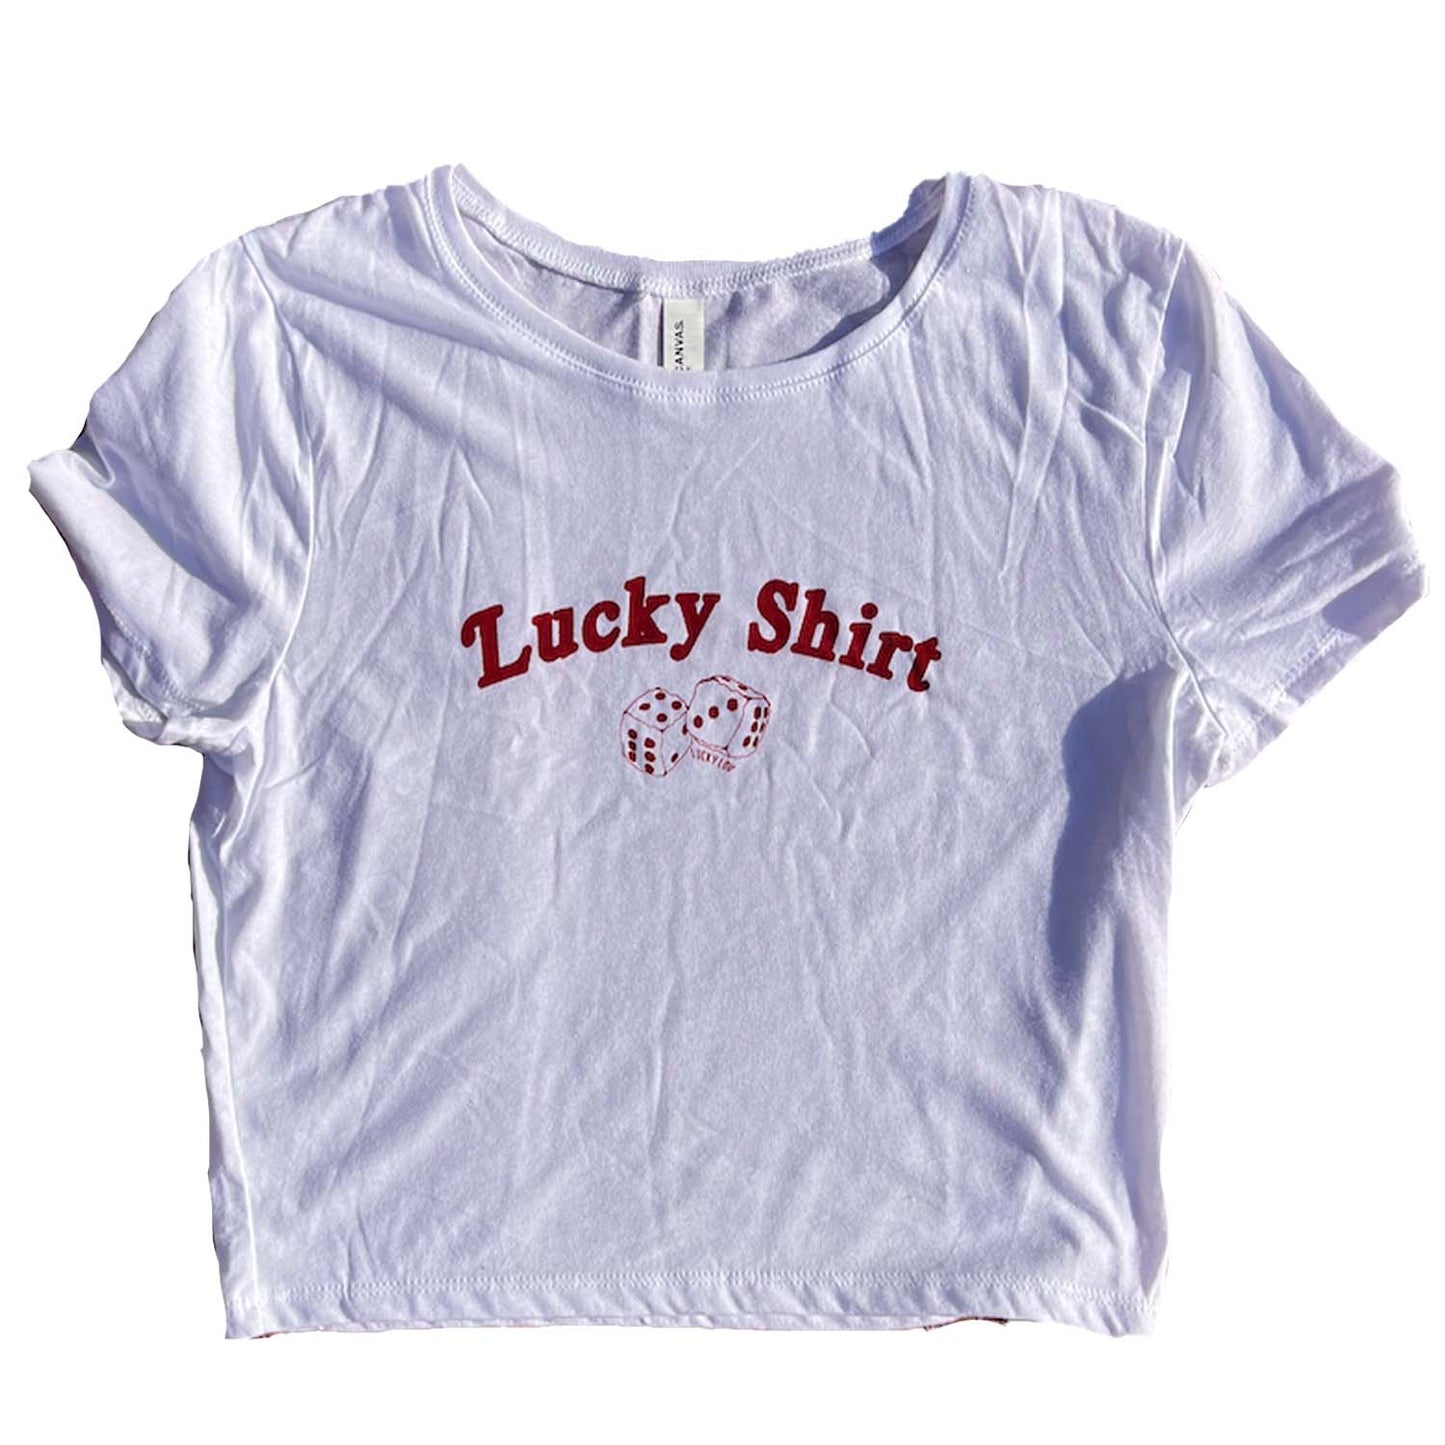 LUCKY SHIRT BABY T IN WHITE